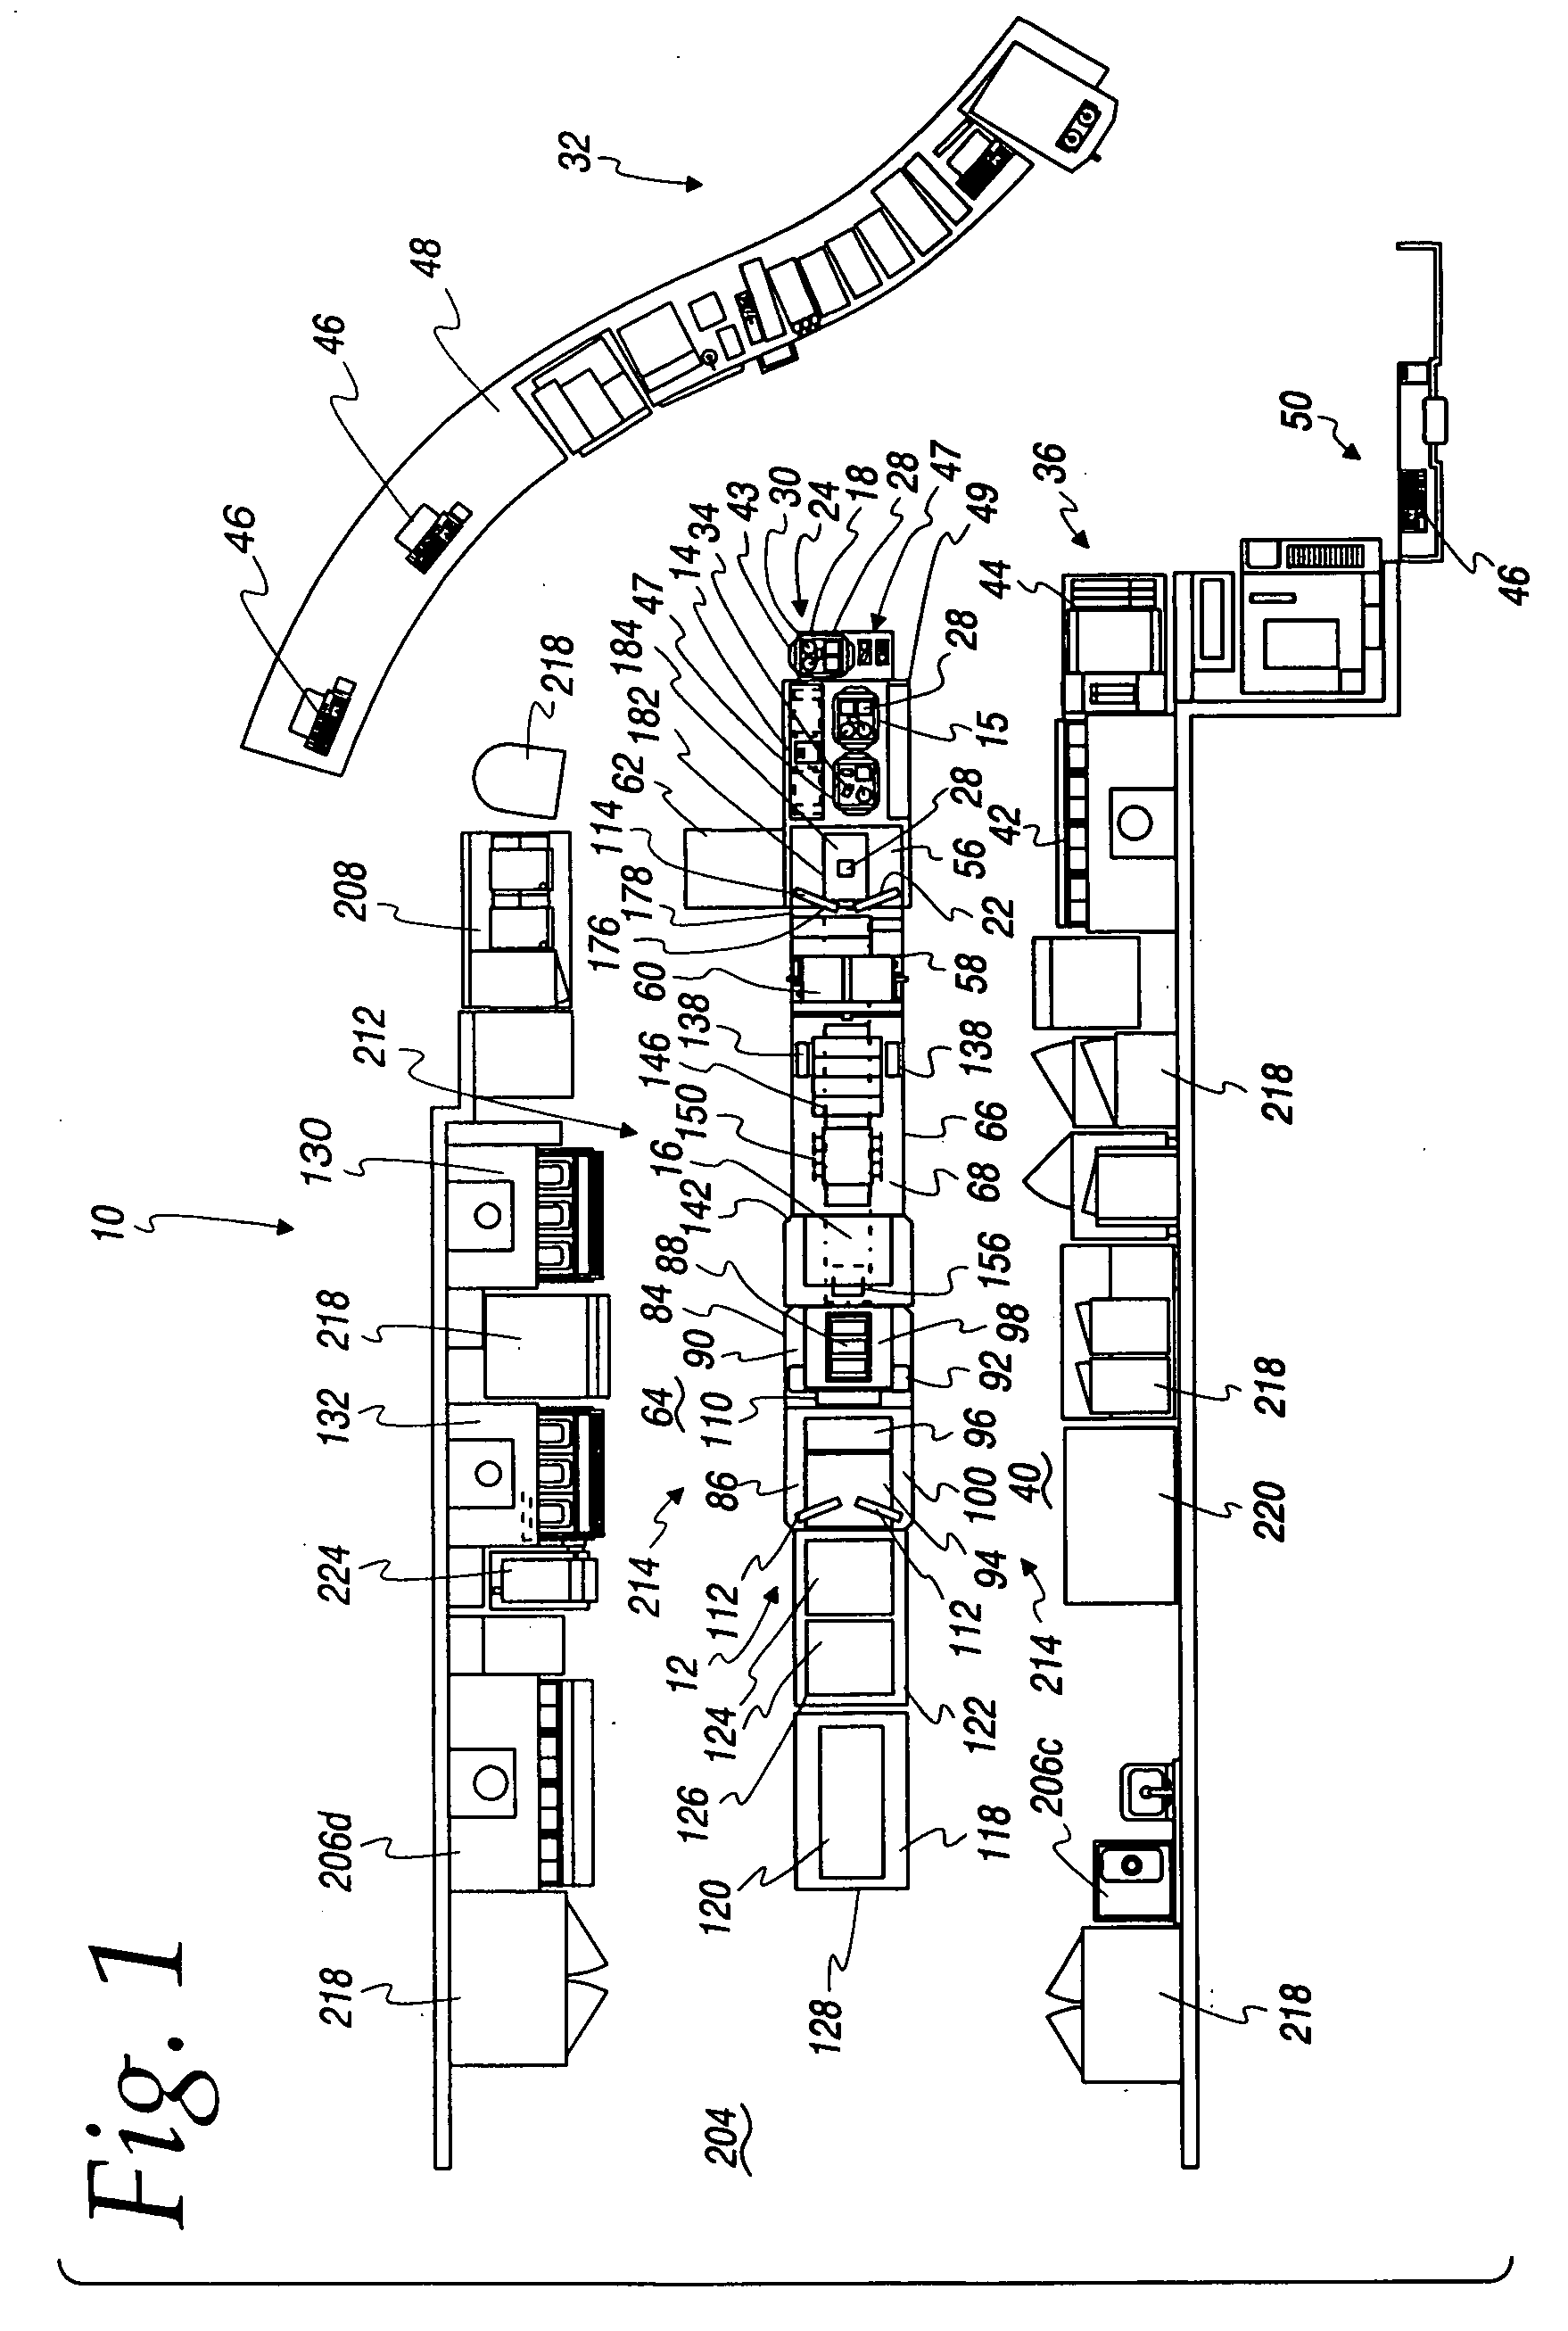 Food item cooking, assembly and packaging system and method